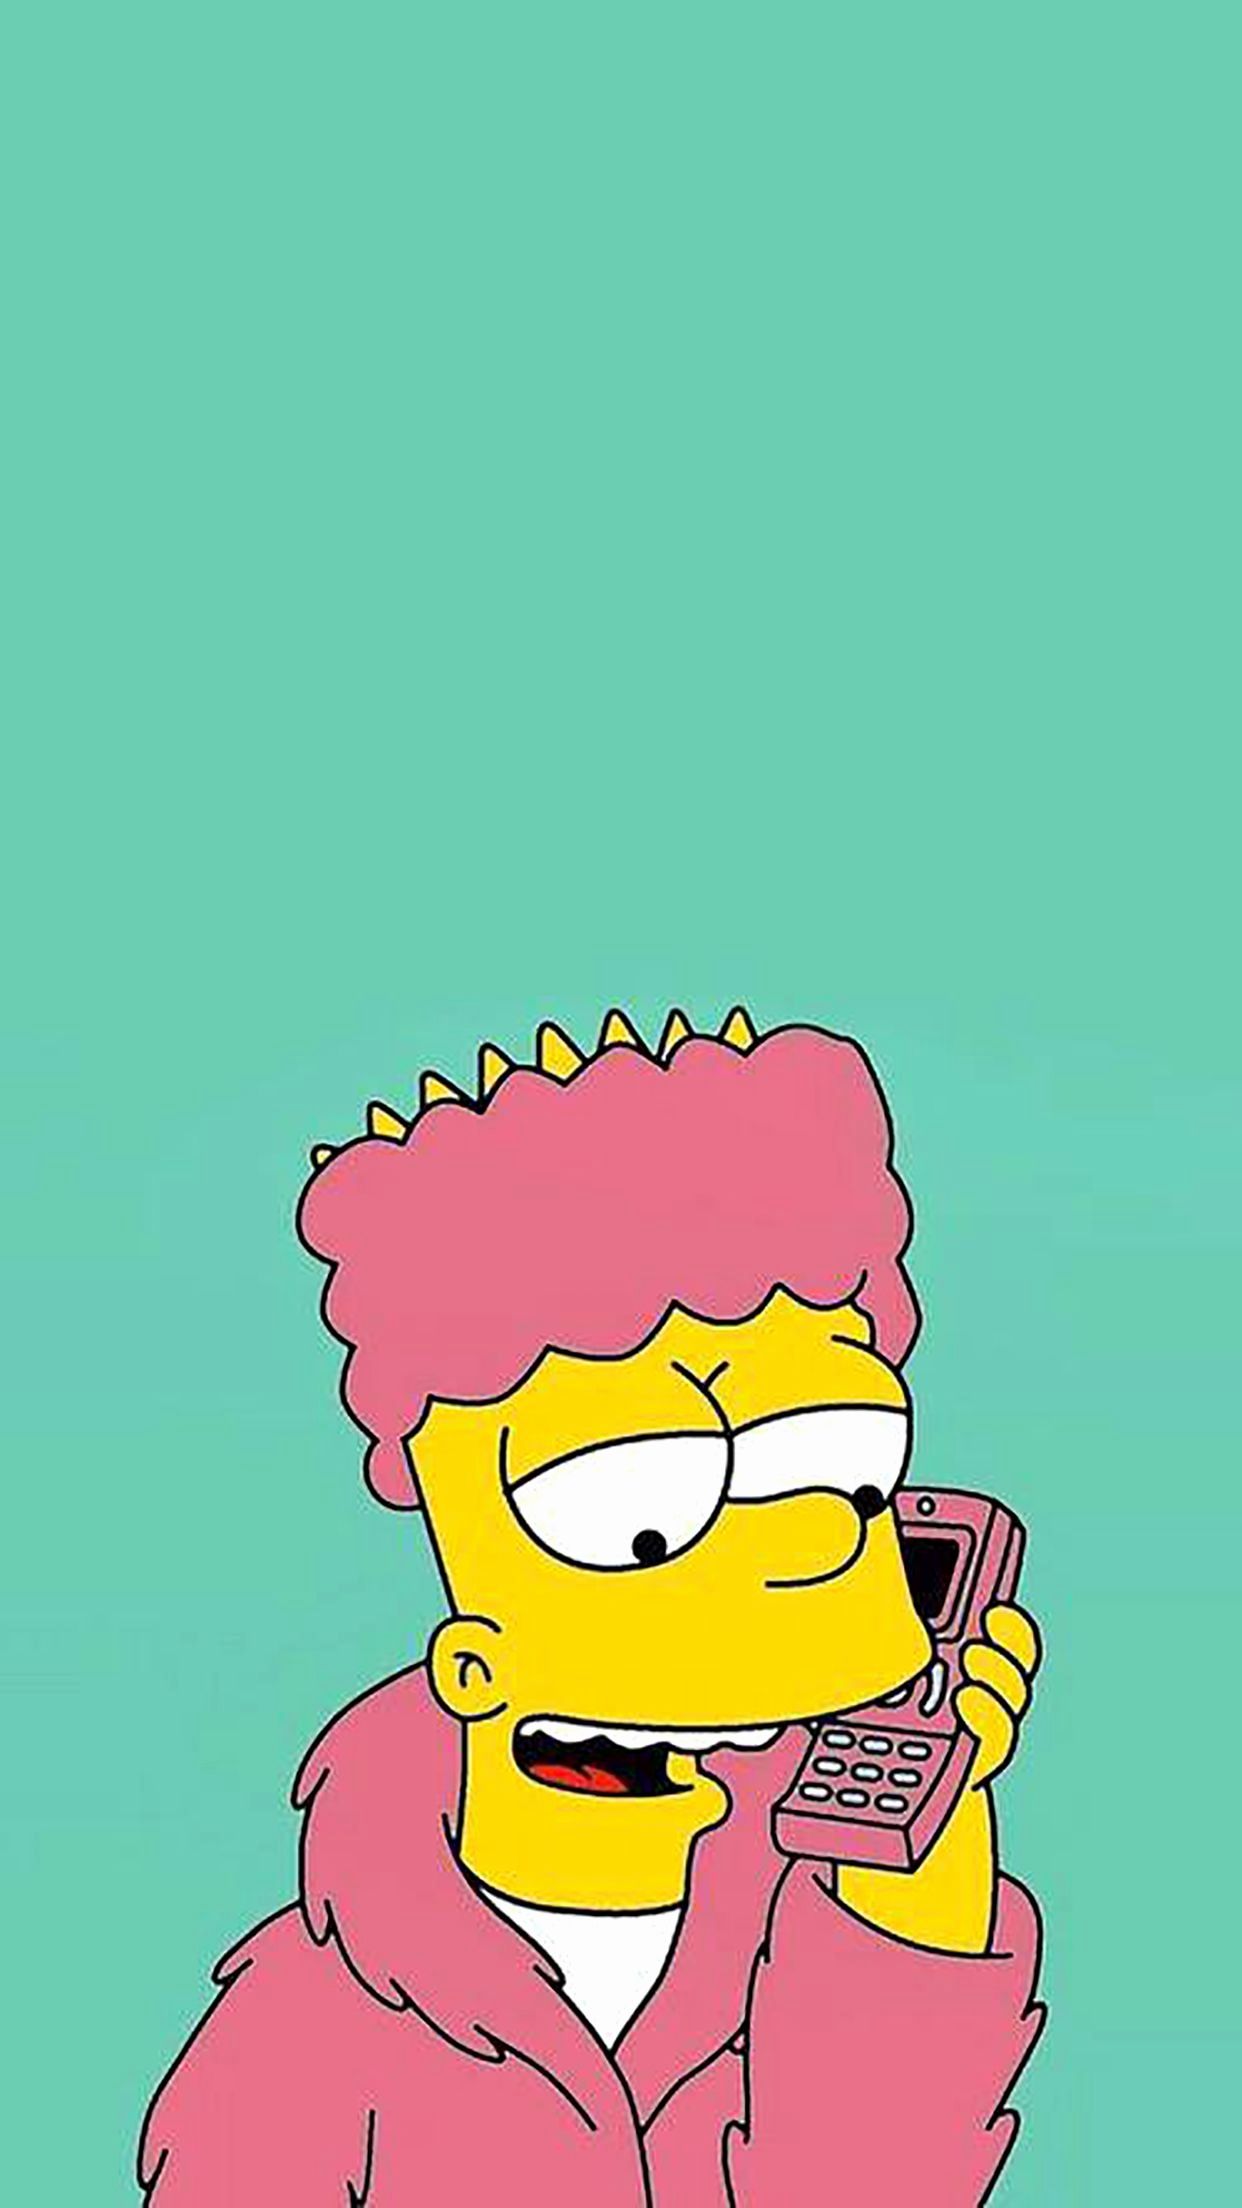 Simpsons iPhone Wallpaper Elegant Bart Simpson iPhone Wallpaper iPhoneswallpaper iPhone Wallpaper Of the Day of The Hudson